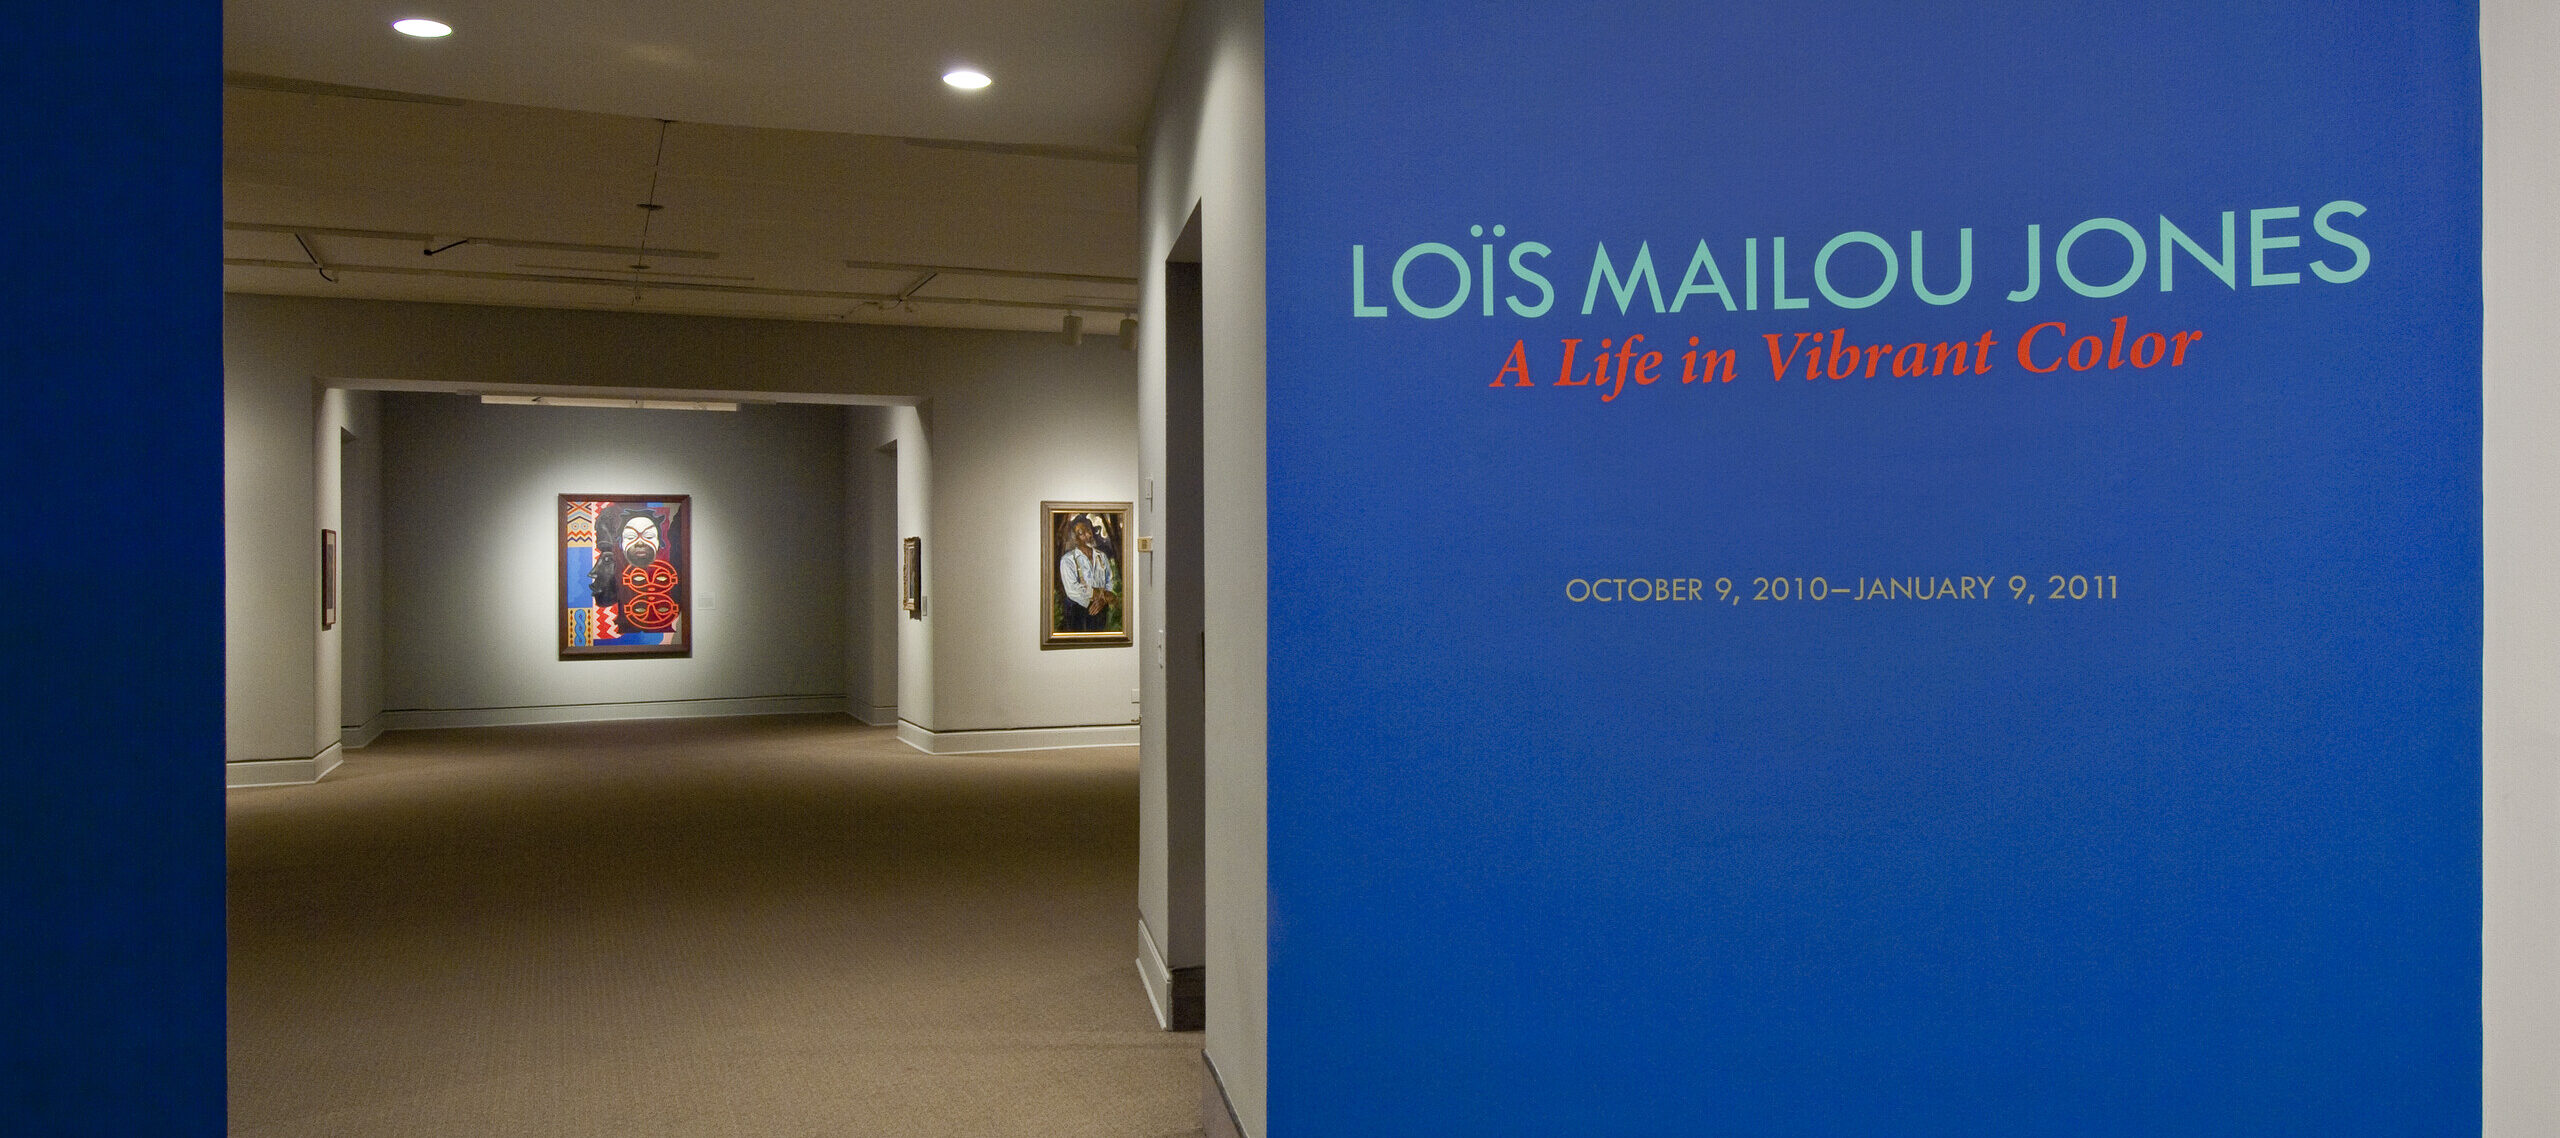 Intervior view of the museum galleries features a vibrant blue wall with the text 'Lois Mailou Jones: A Life in Vibrant Color'. Multiple artworks are displayed in the background.